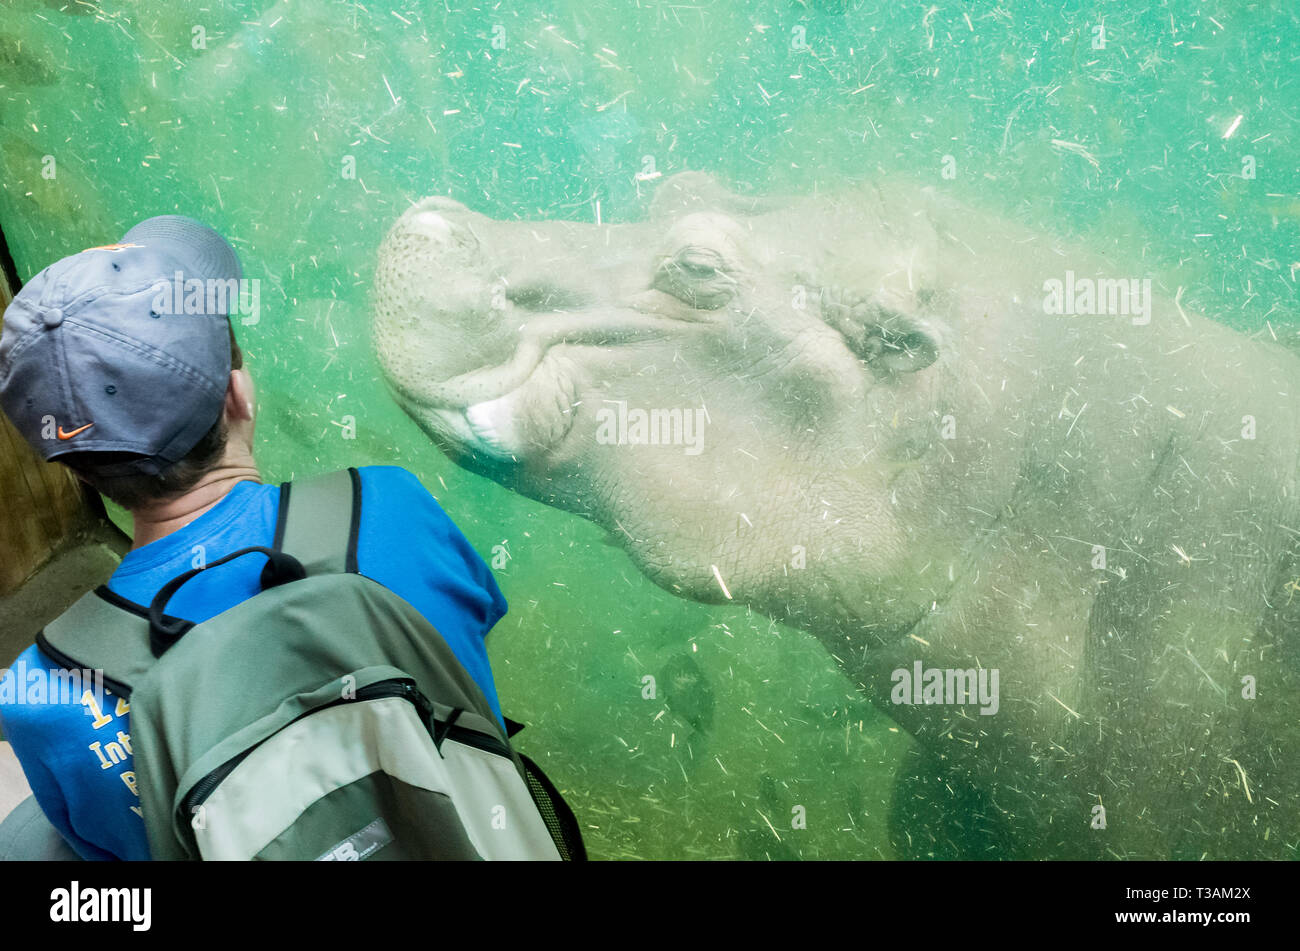 A man and a hippopotamus interact at the St. Louis Zoo in Missouri Stock Photo